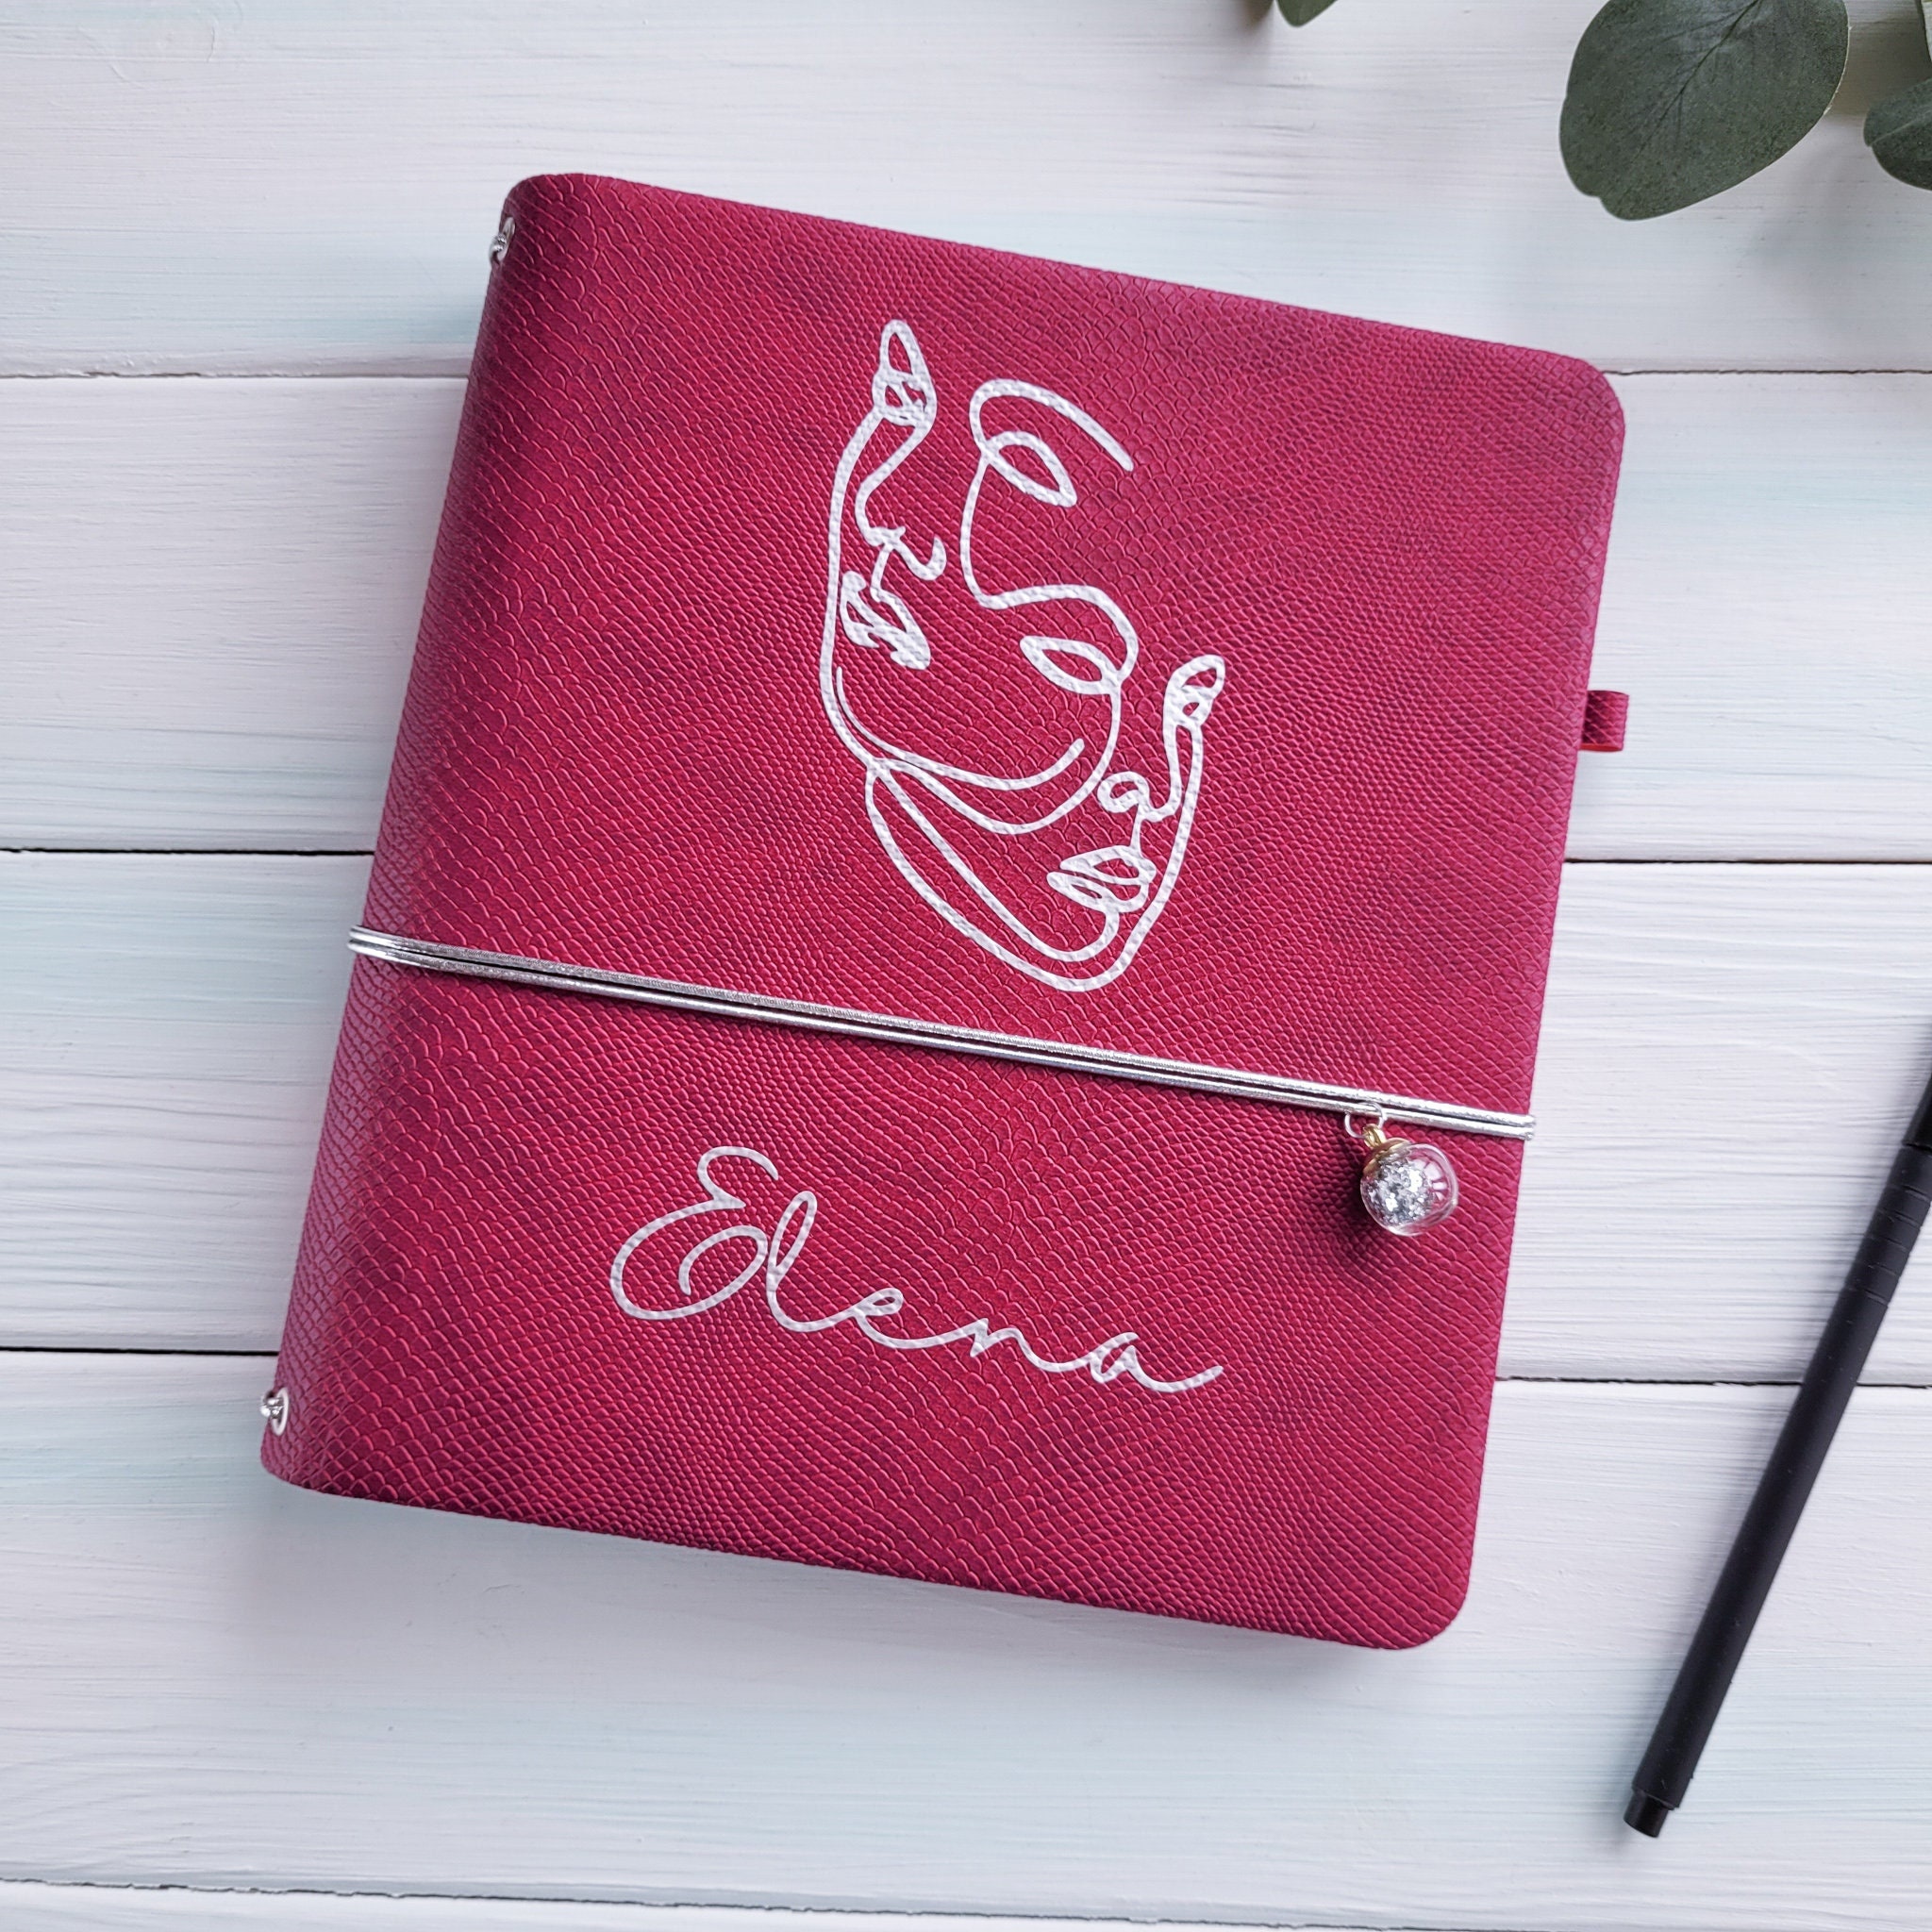 Pink 6-Ring Agenda Cover | A5